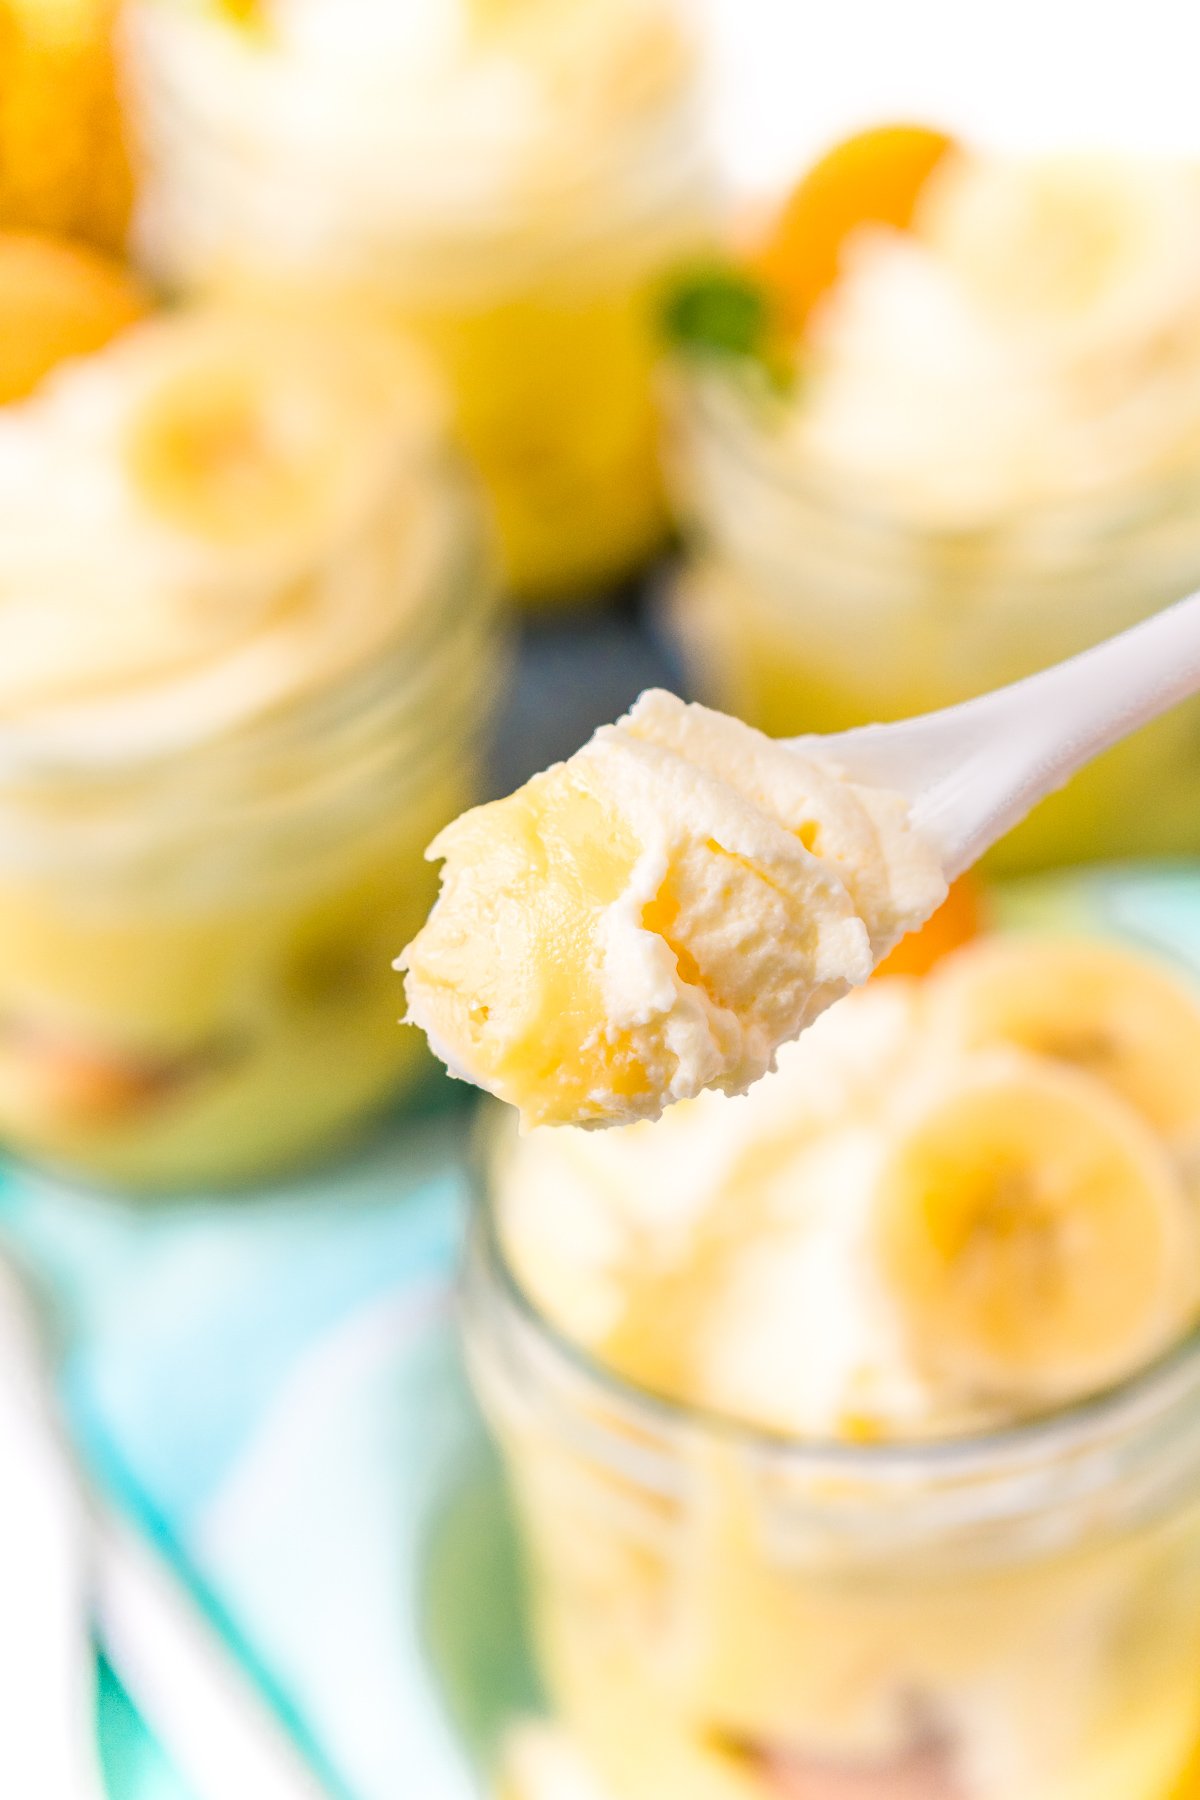 Spoonful of banana pudding with jars of pudding in the background.